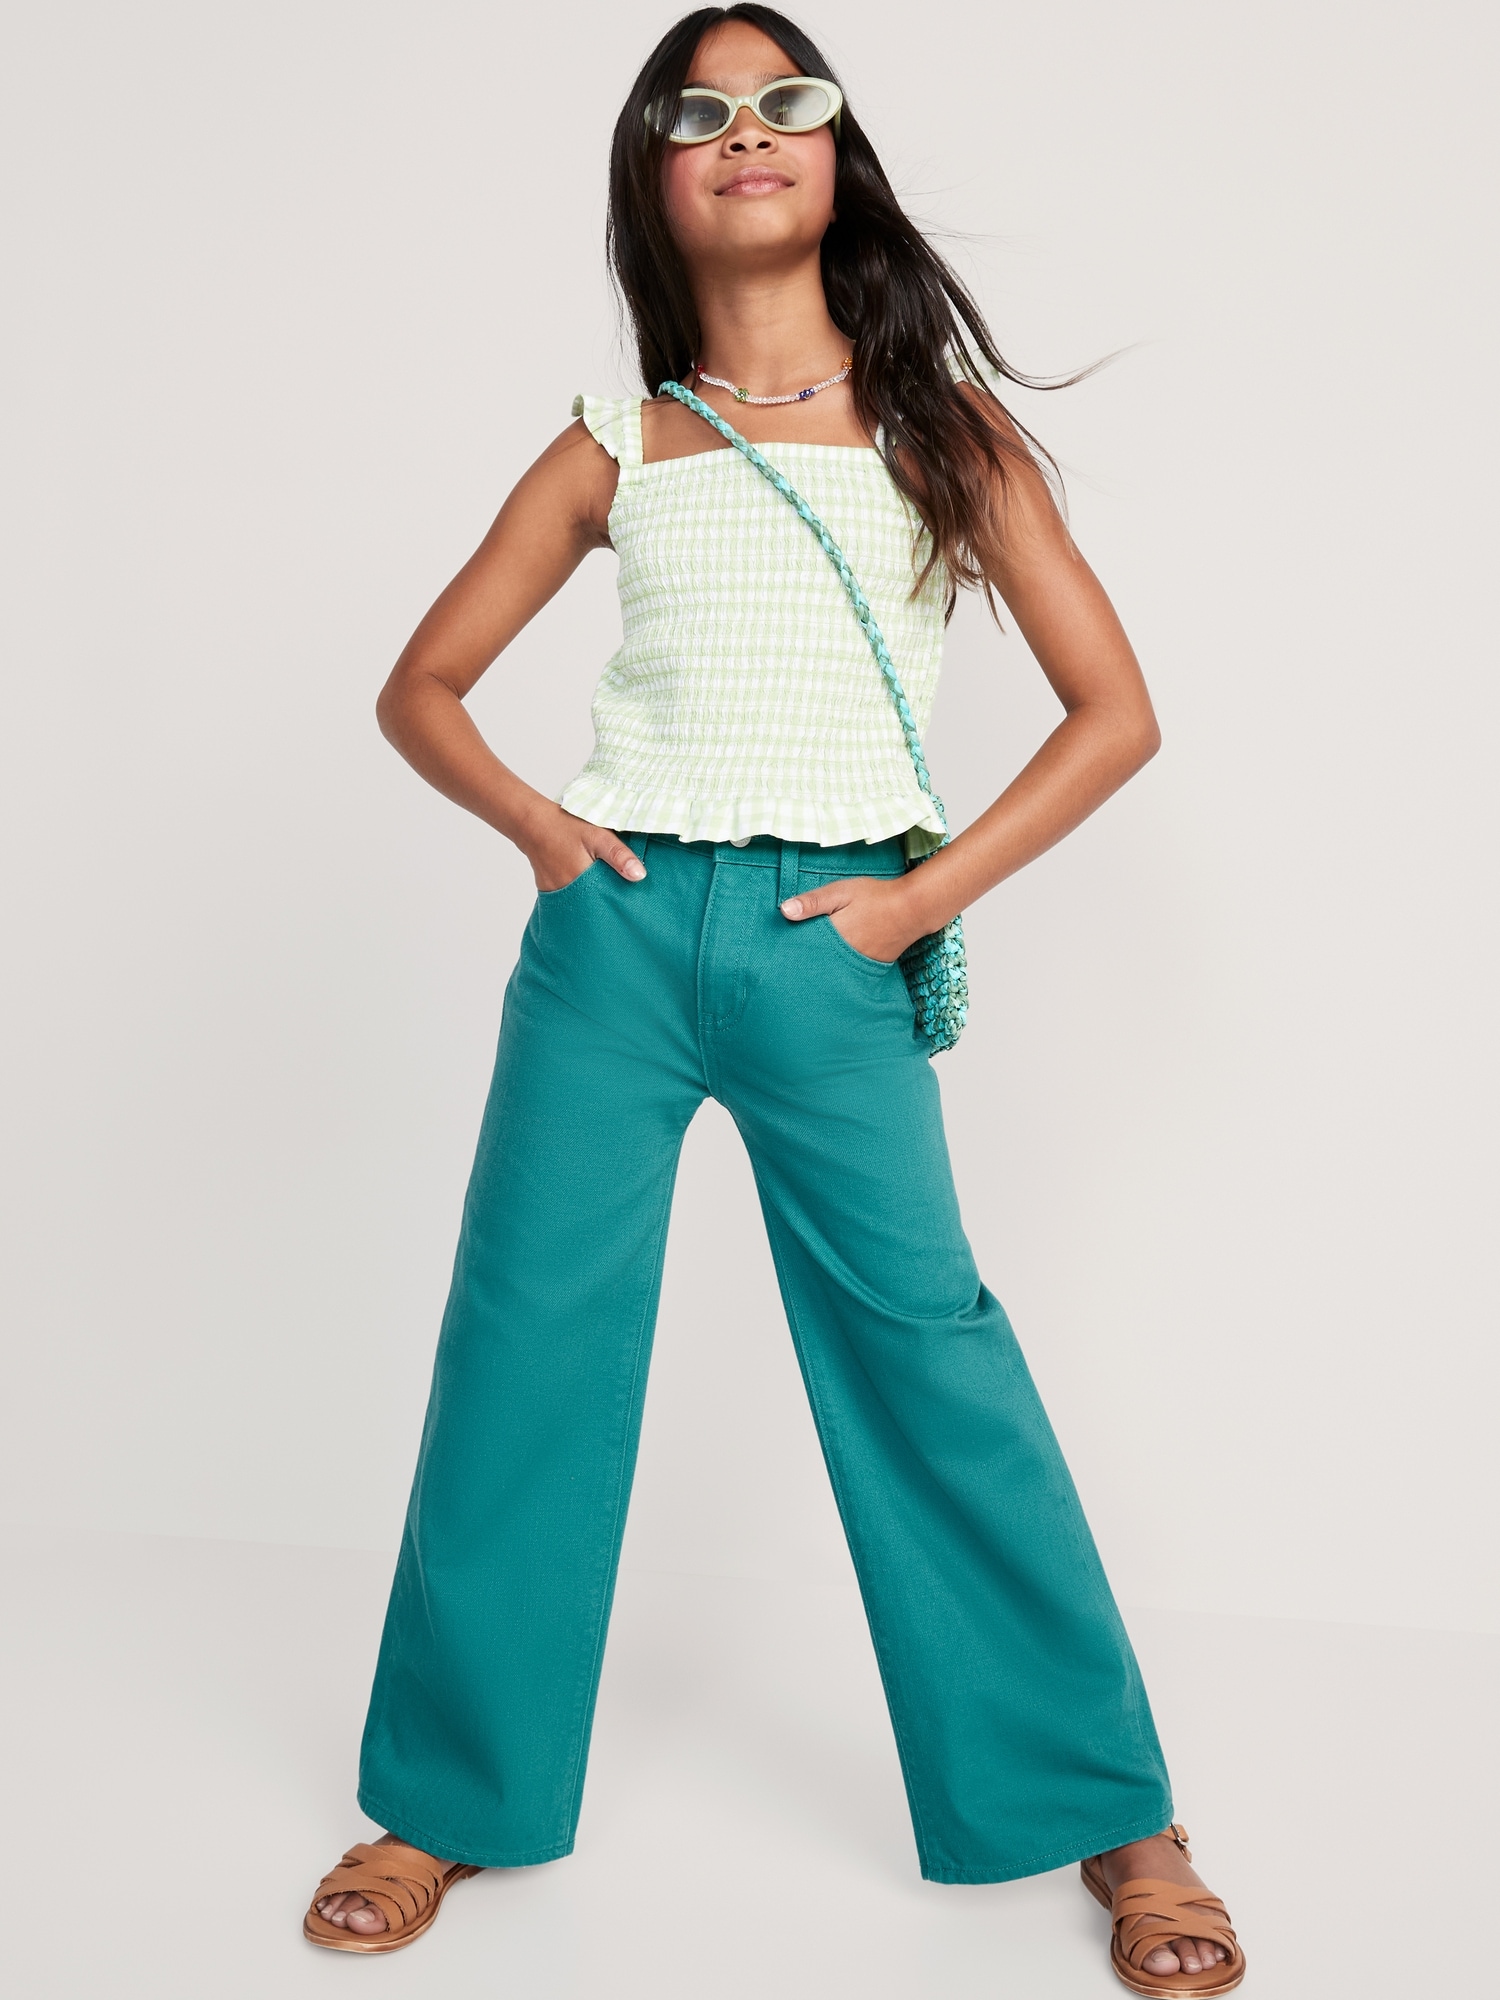 Girl Merchant Marine The Wide Leg Resort Pant by Janie and Jack